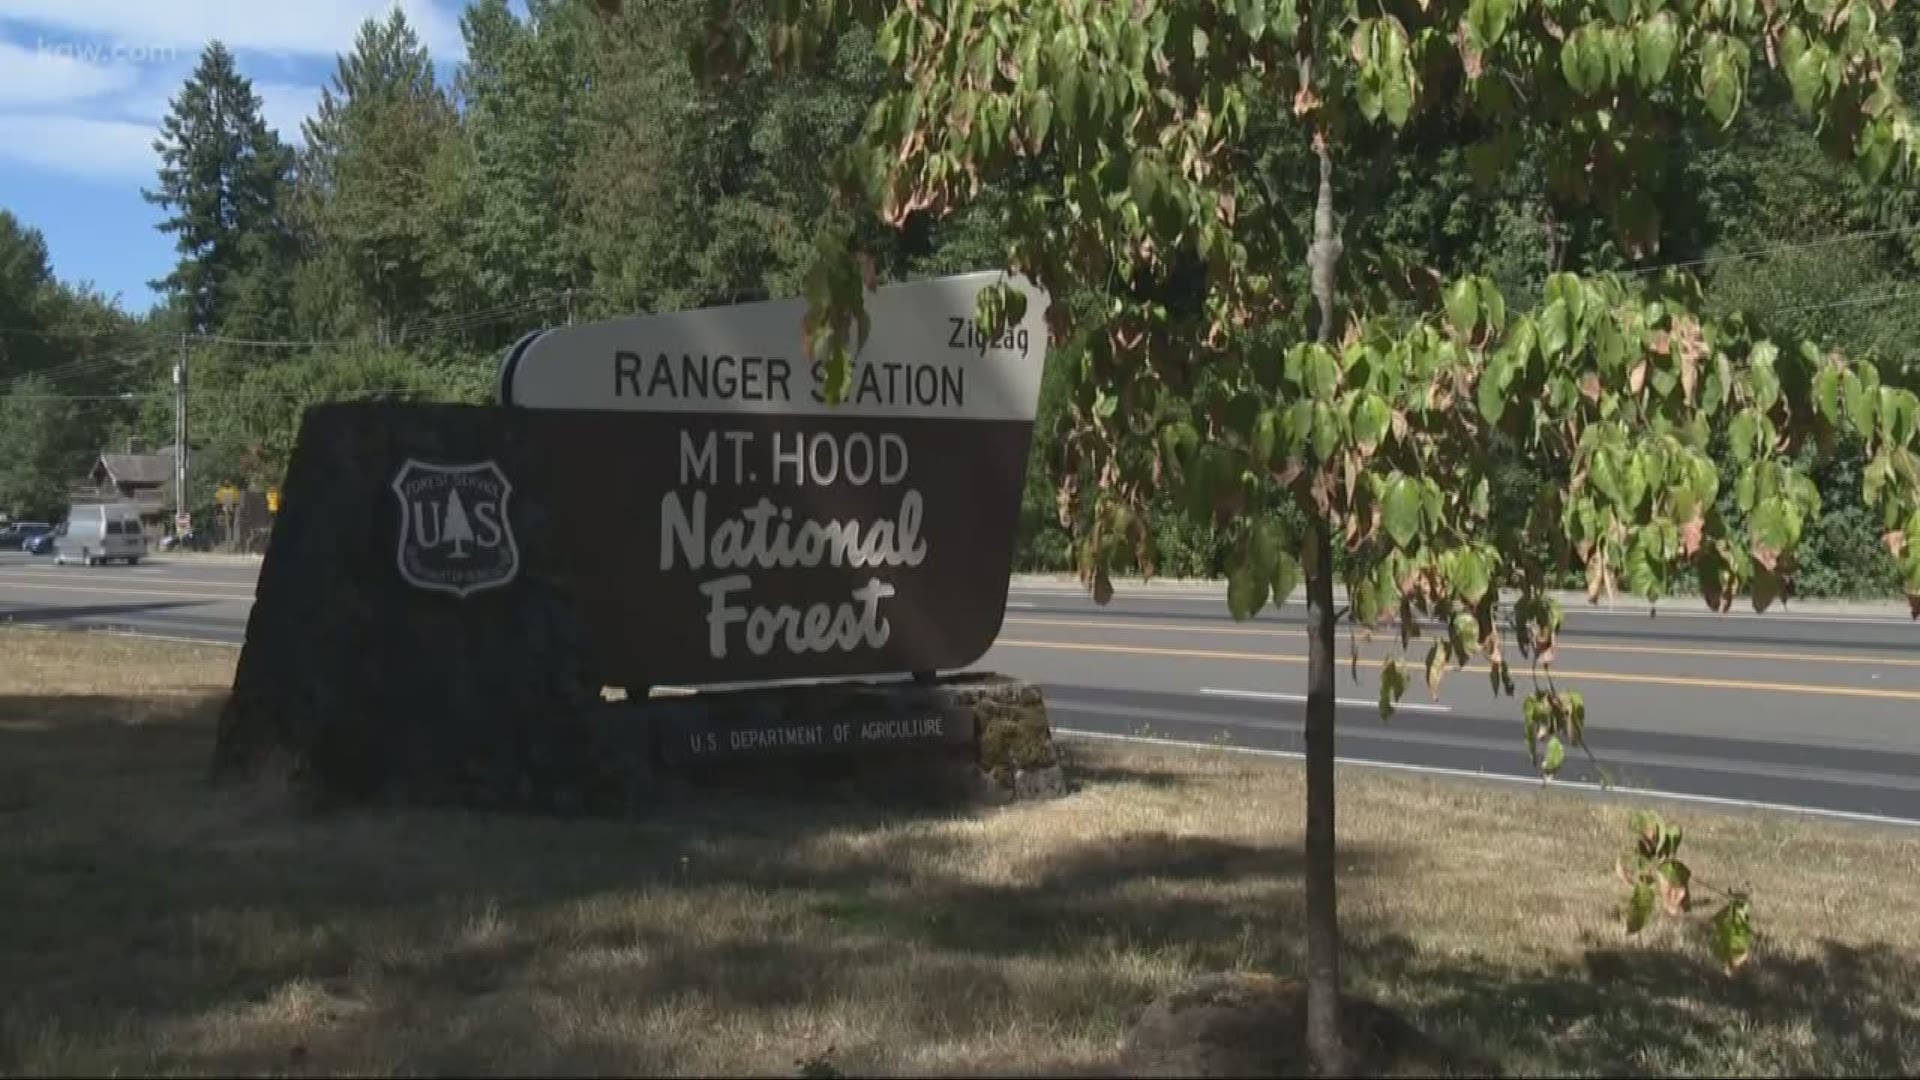 A missing hiker who was found dead in the Mount Hood National Forest area was killed in a suspected cougar attack, according to the Clackamas County Sheriff's Office.